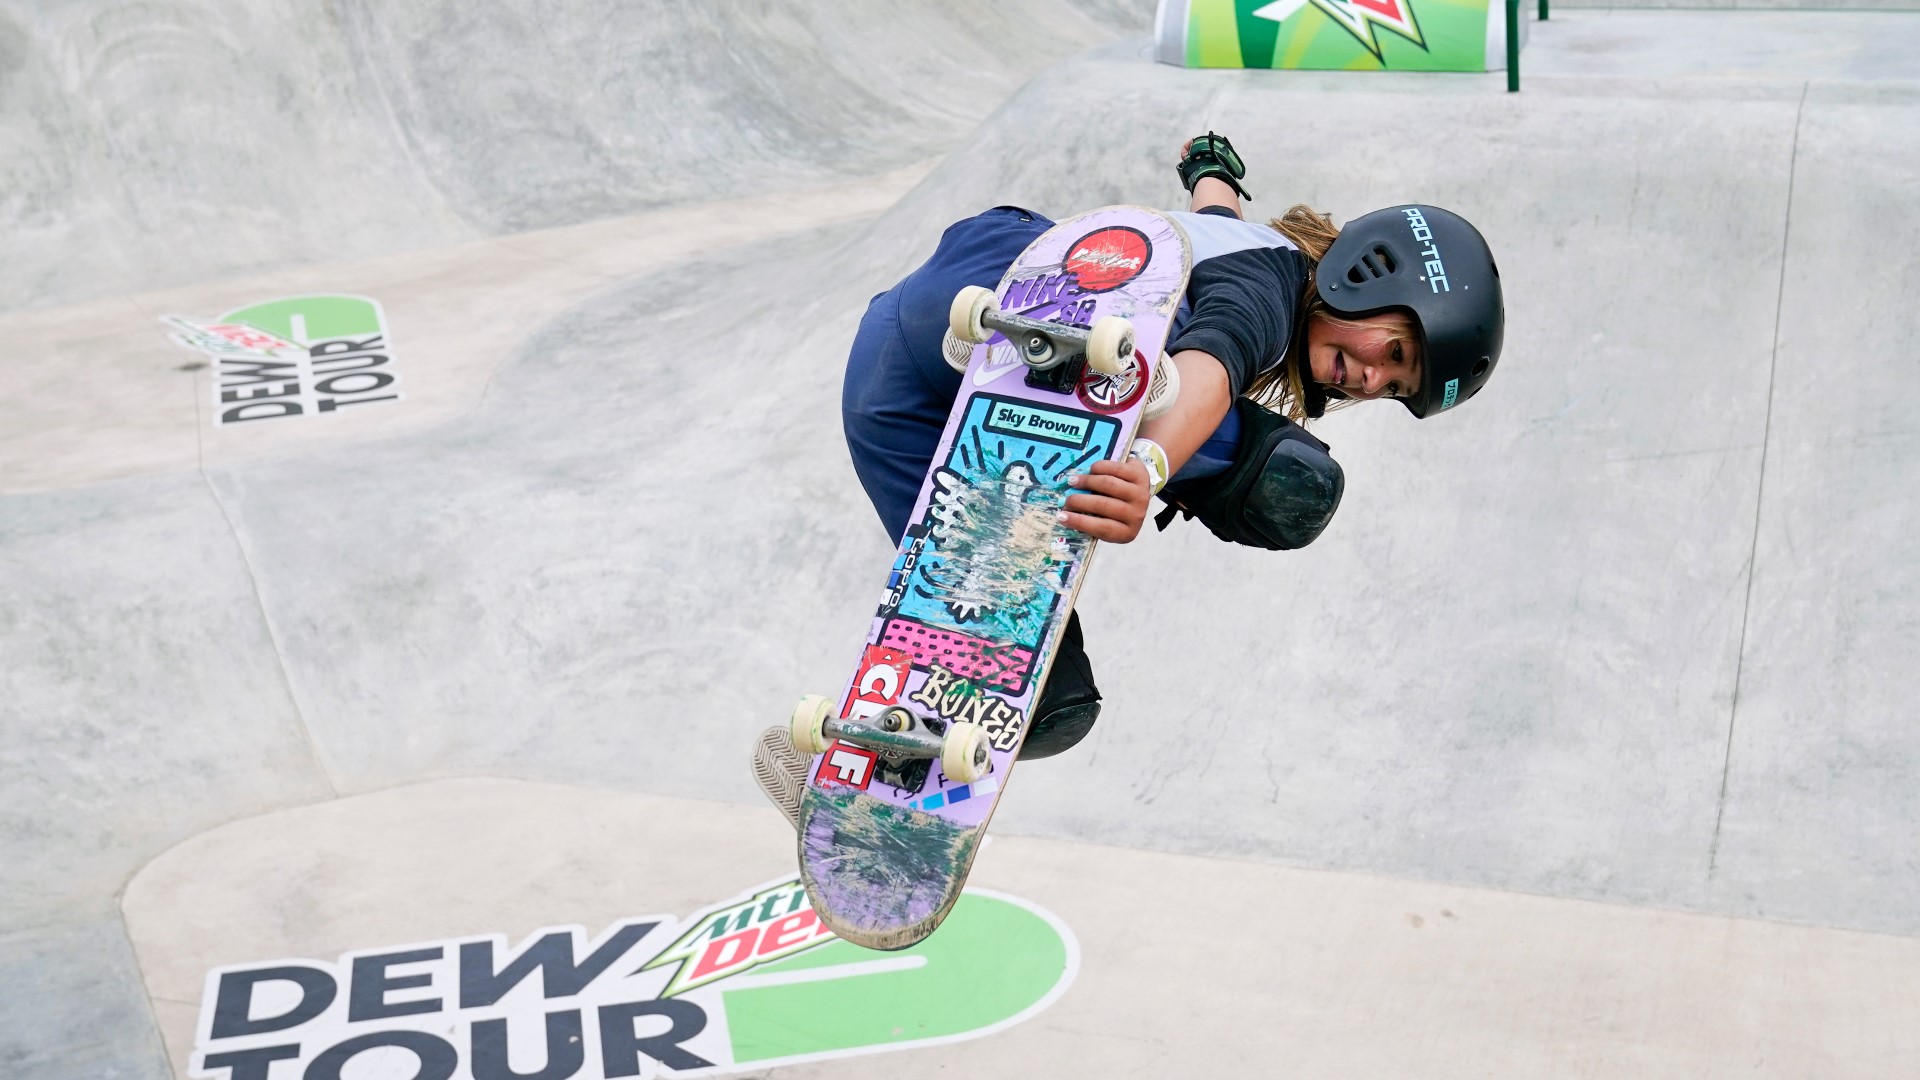 The July 29 & 30 event at Lauridsen Skatepark is free and open to the public, according to the Dew Tour.